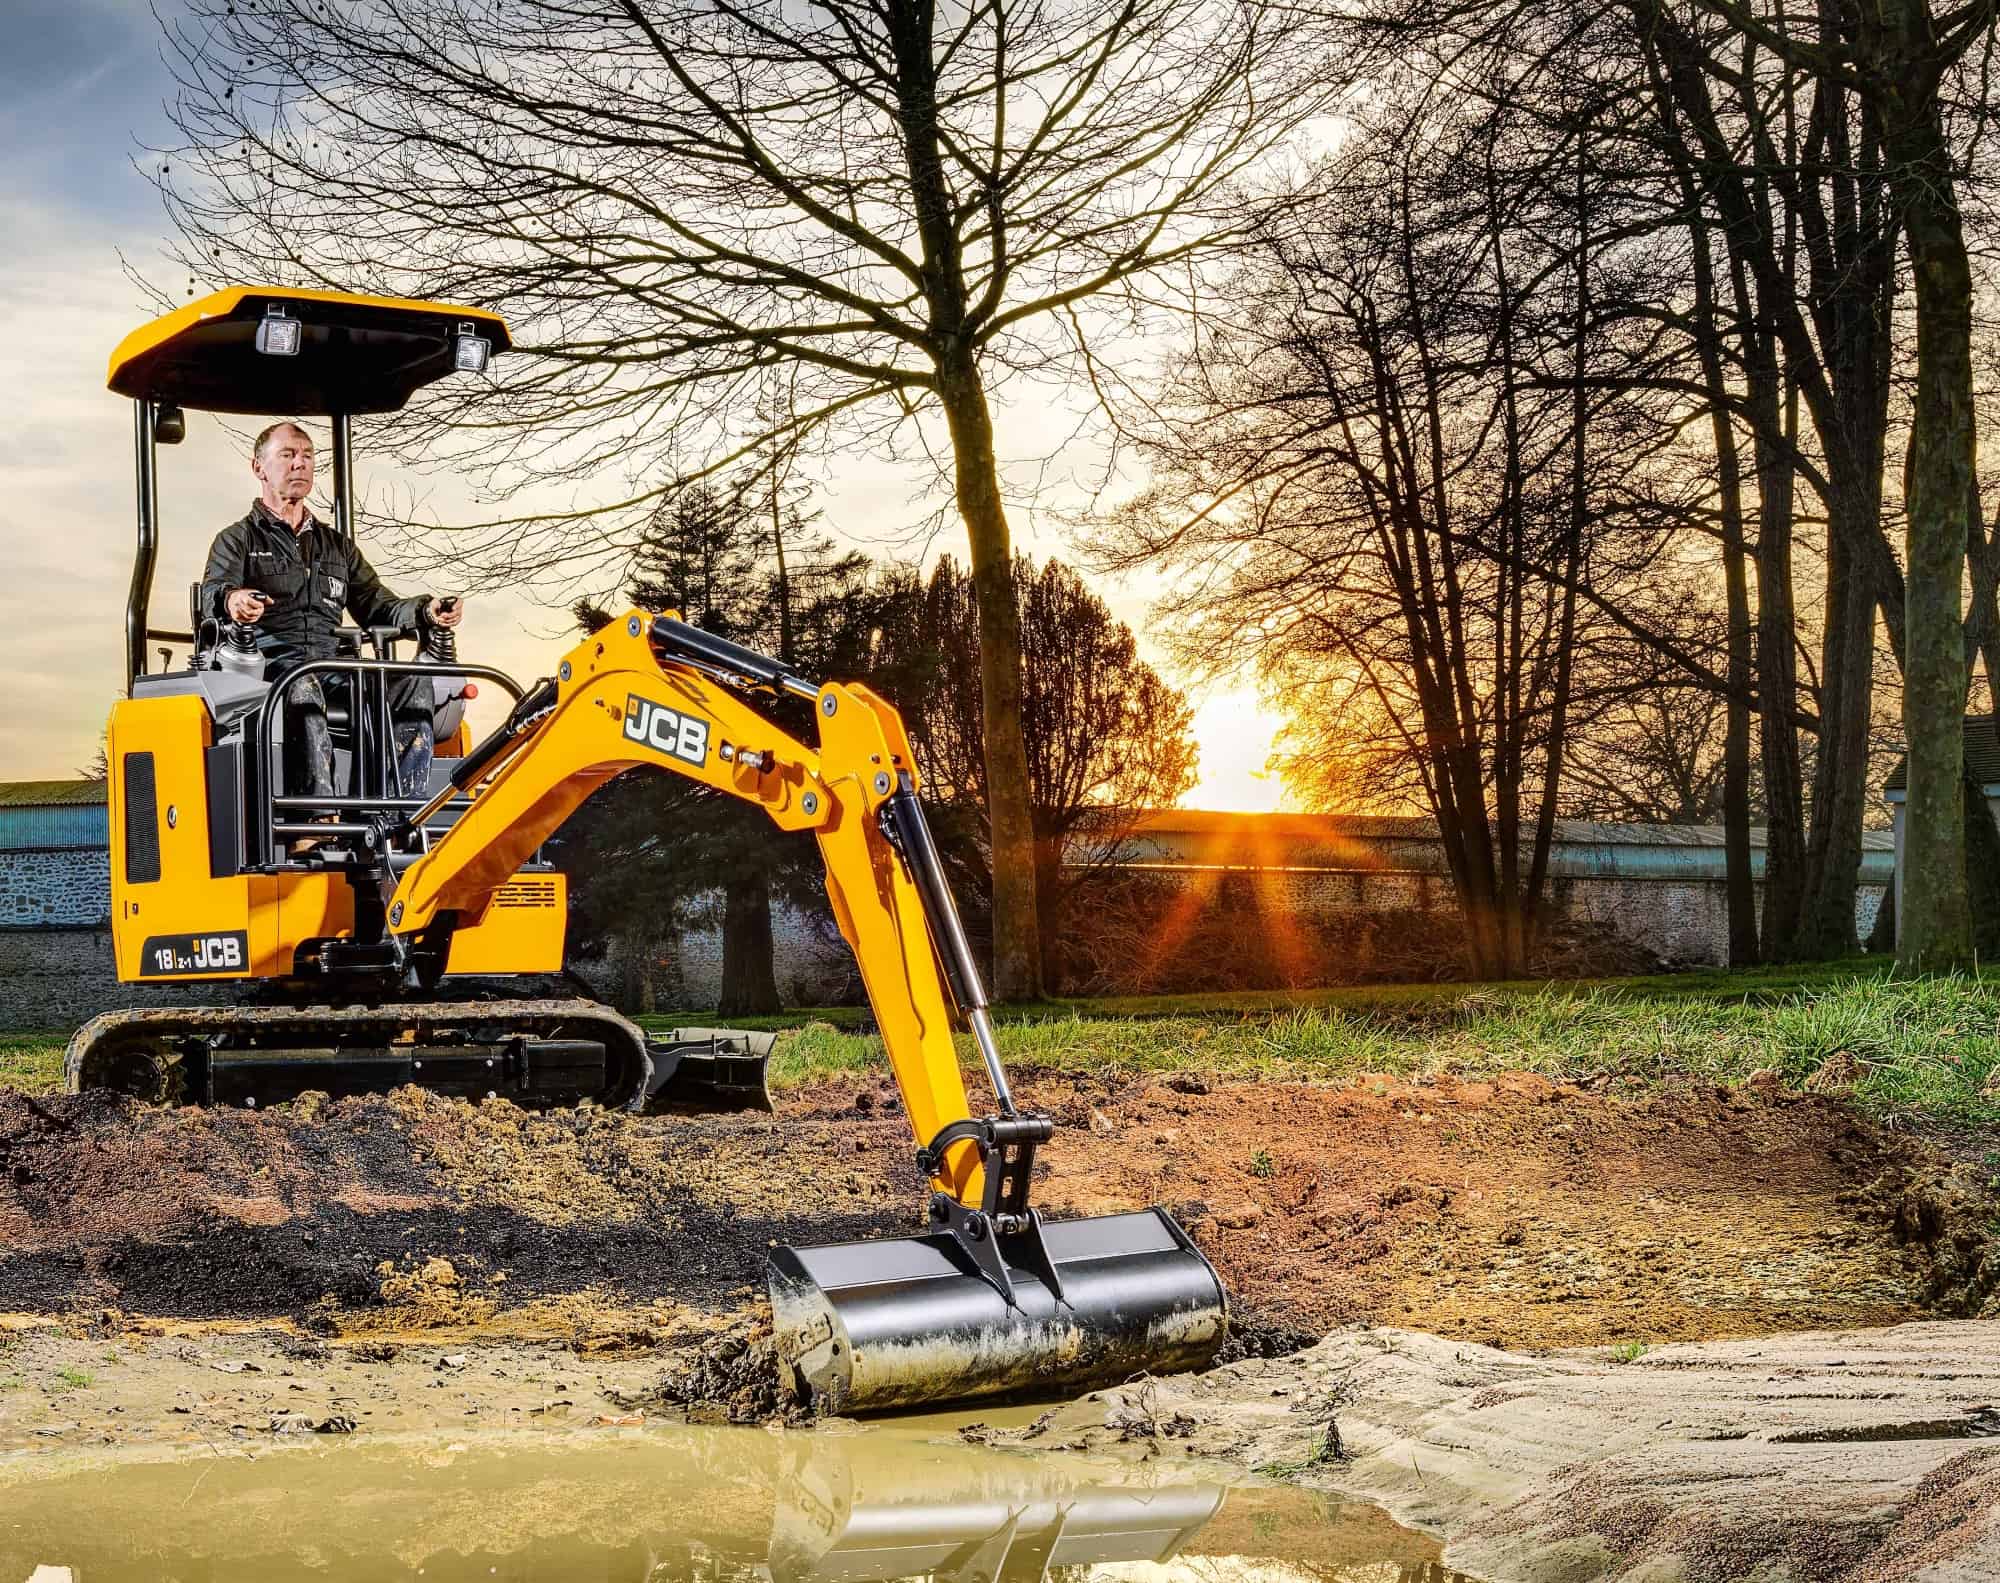 JCB 18Z-1 mini digger for on-farm drainage and ground works